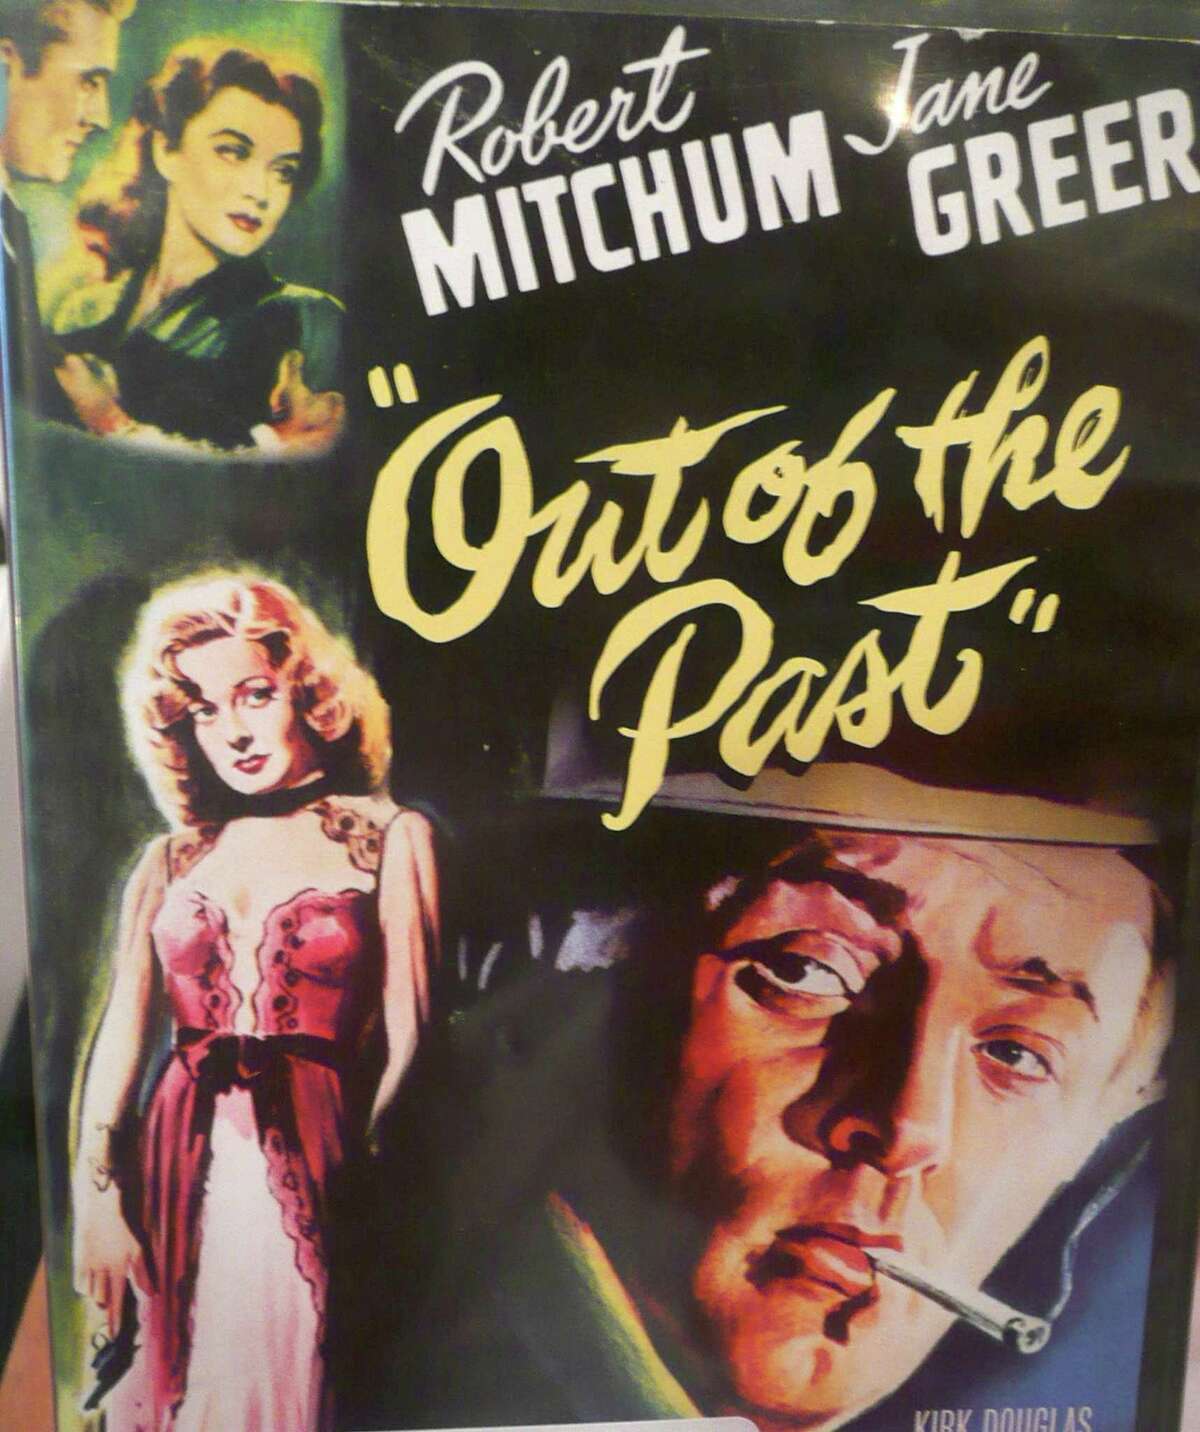 Bridgeport native Robert Mitchum found one of his signature roles as a man searching for a former employer’s missing girlfriend in the 1947 film noir classic, “Out of the Past.”